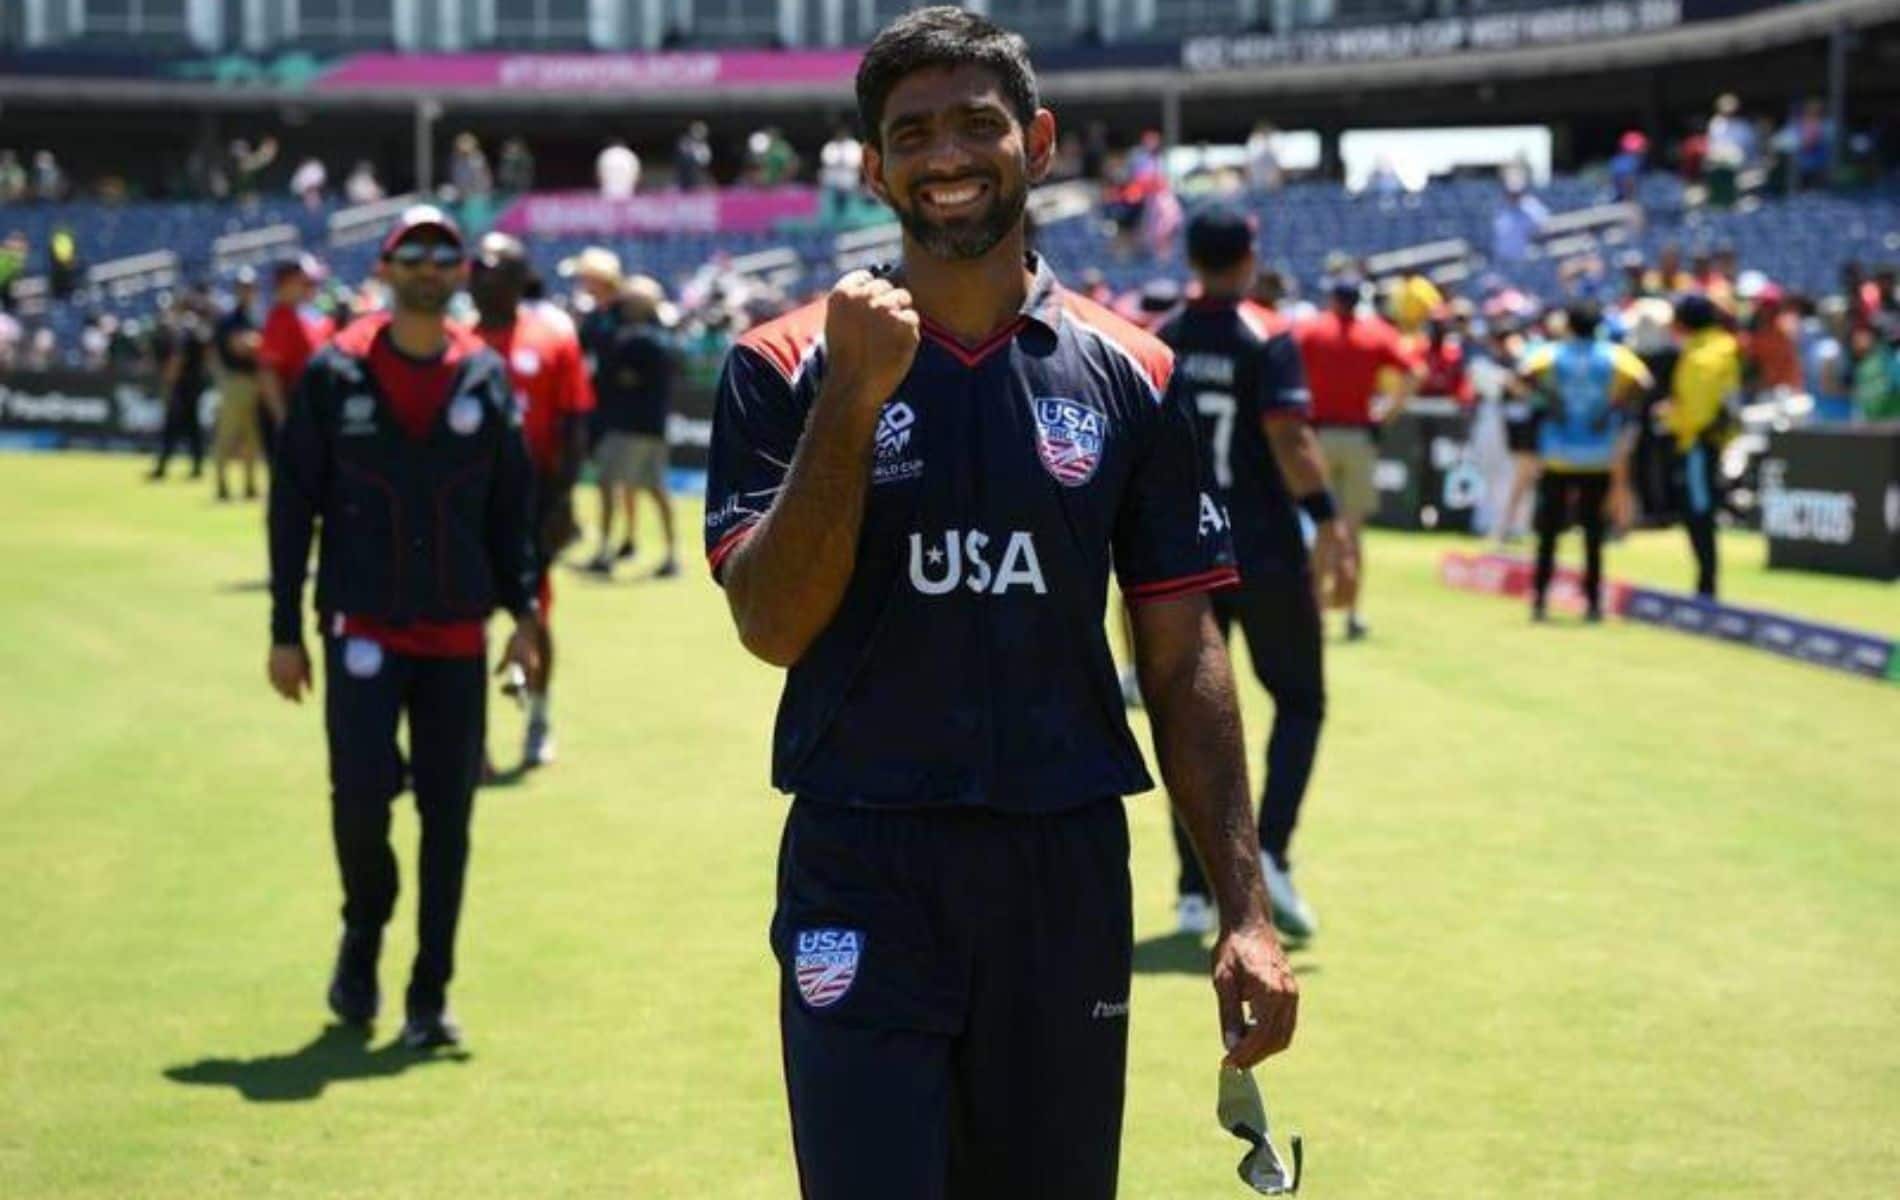 Netravalkar took 2 wickets against India in ICC T20 World Cup (X)